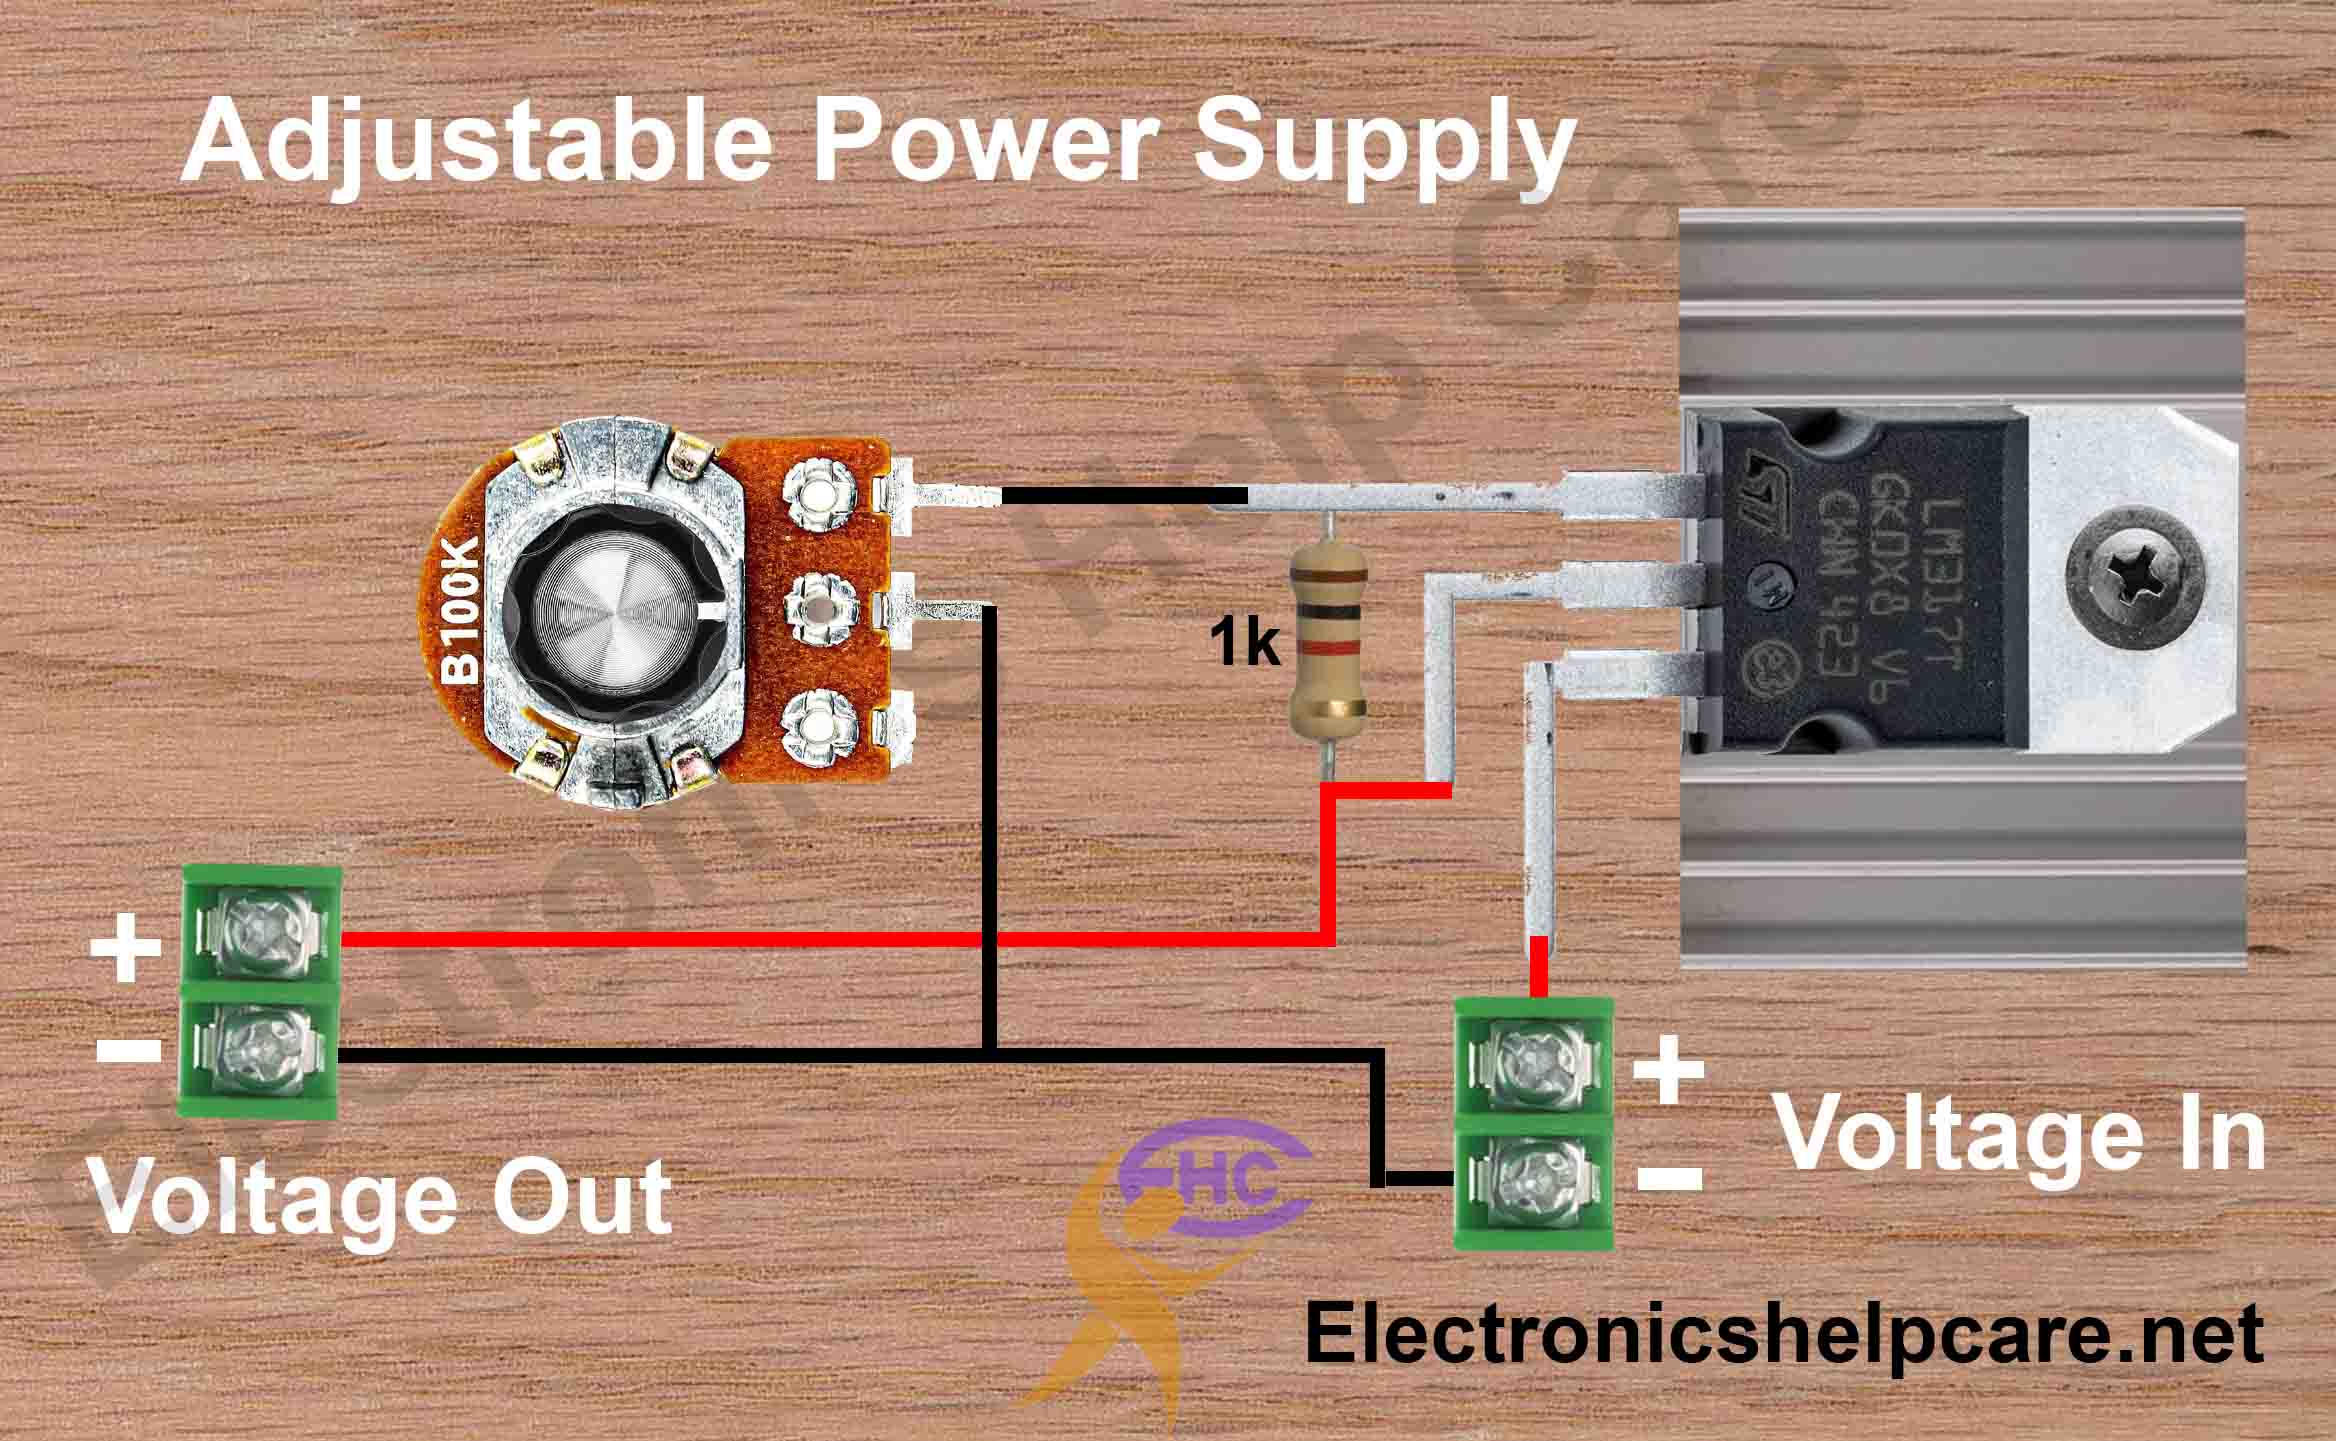 Adjustable power supply - Electronics Help Care